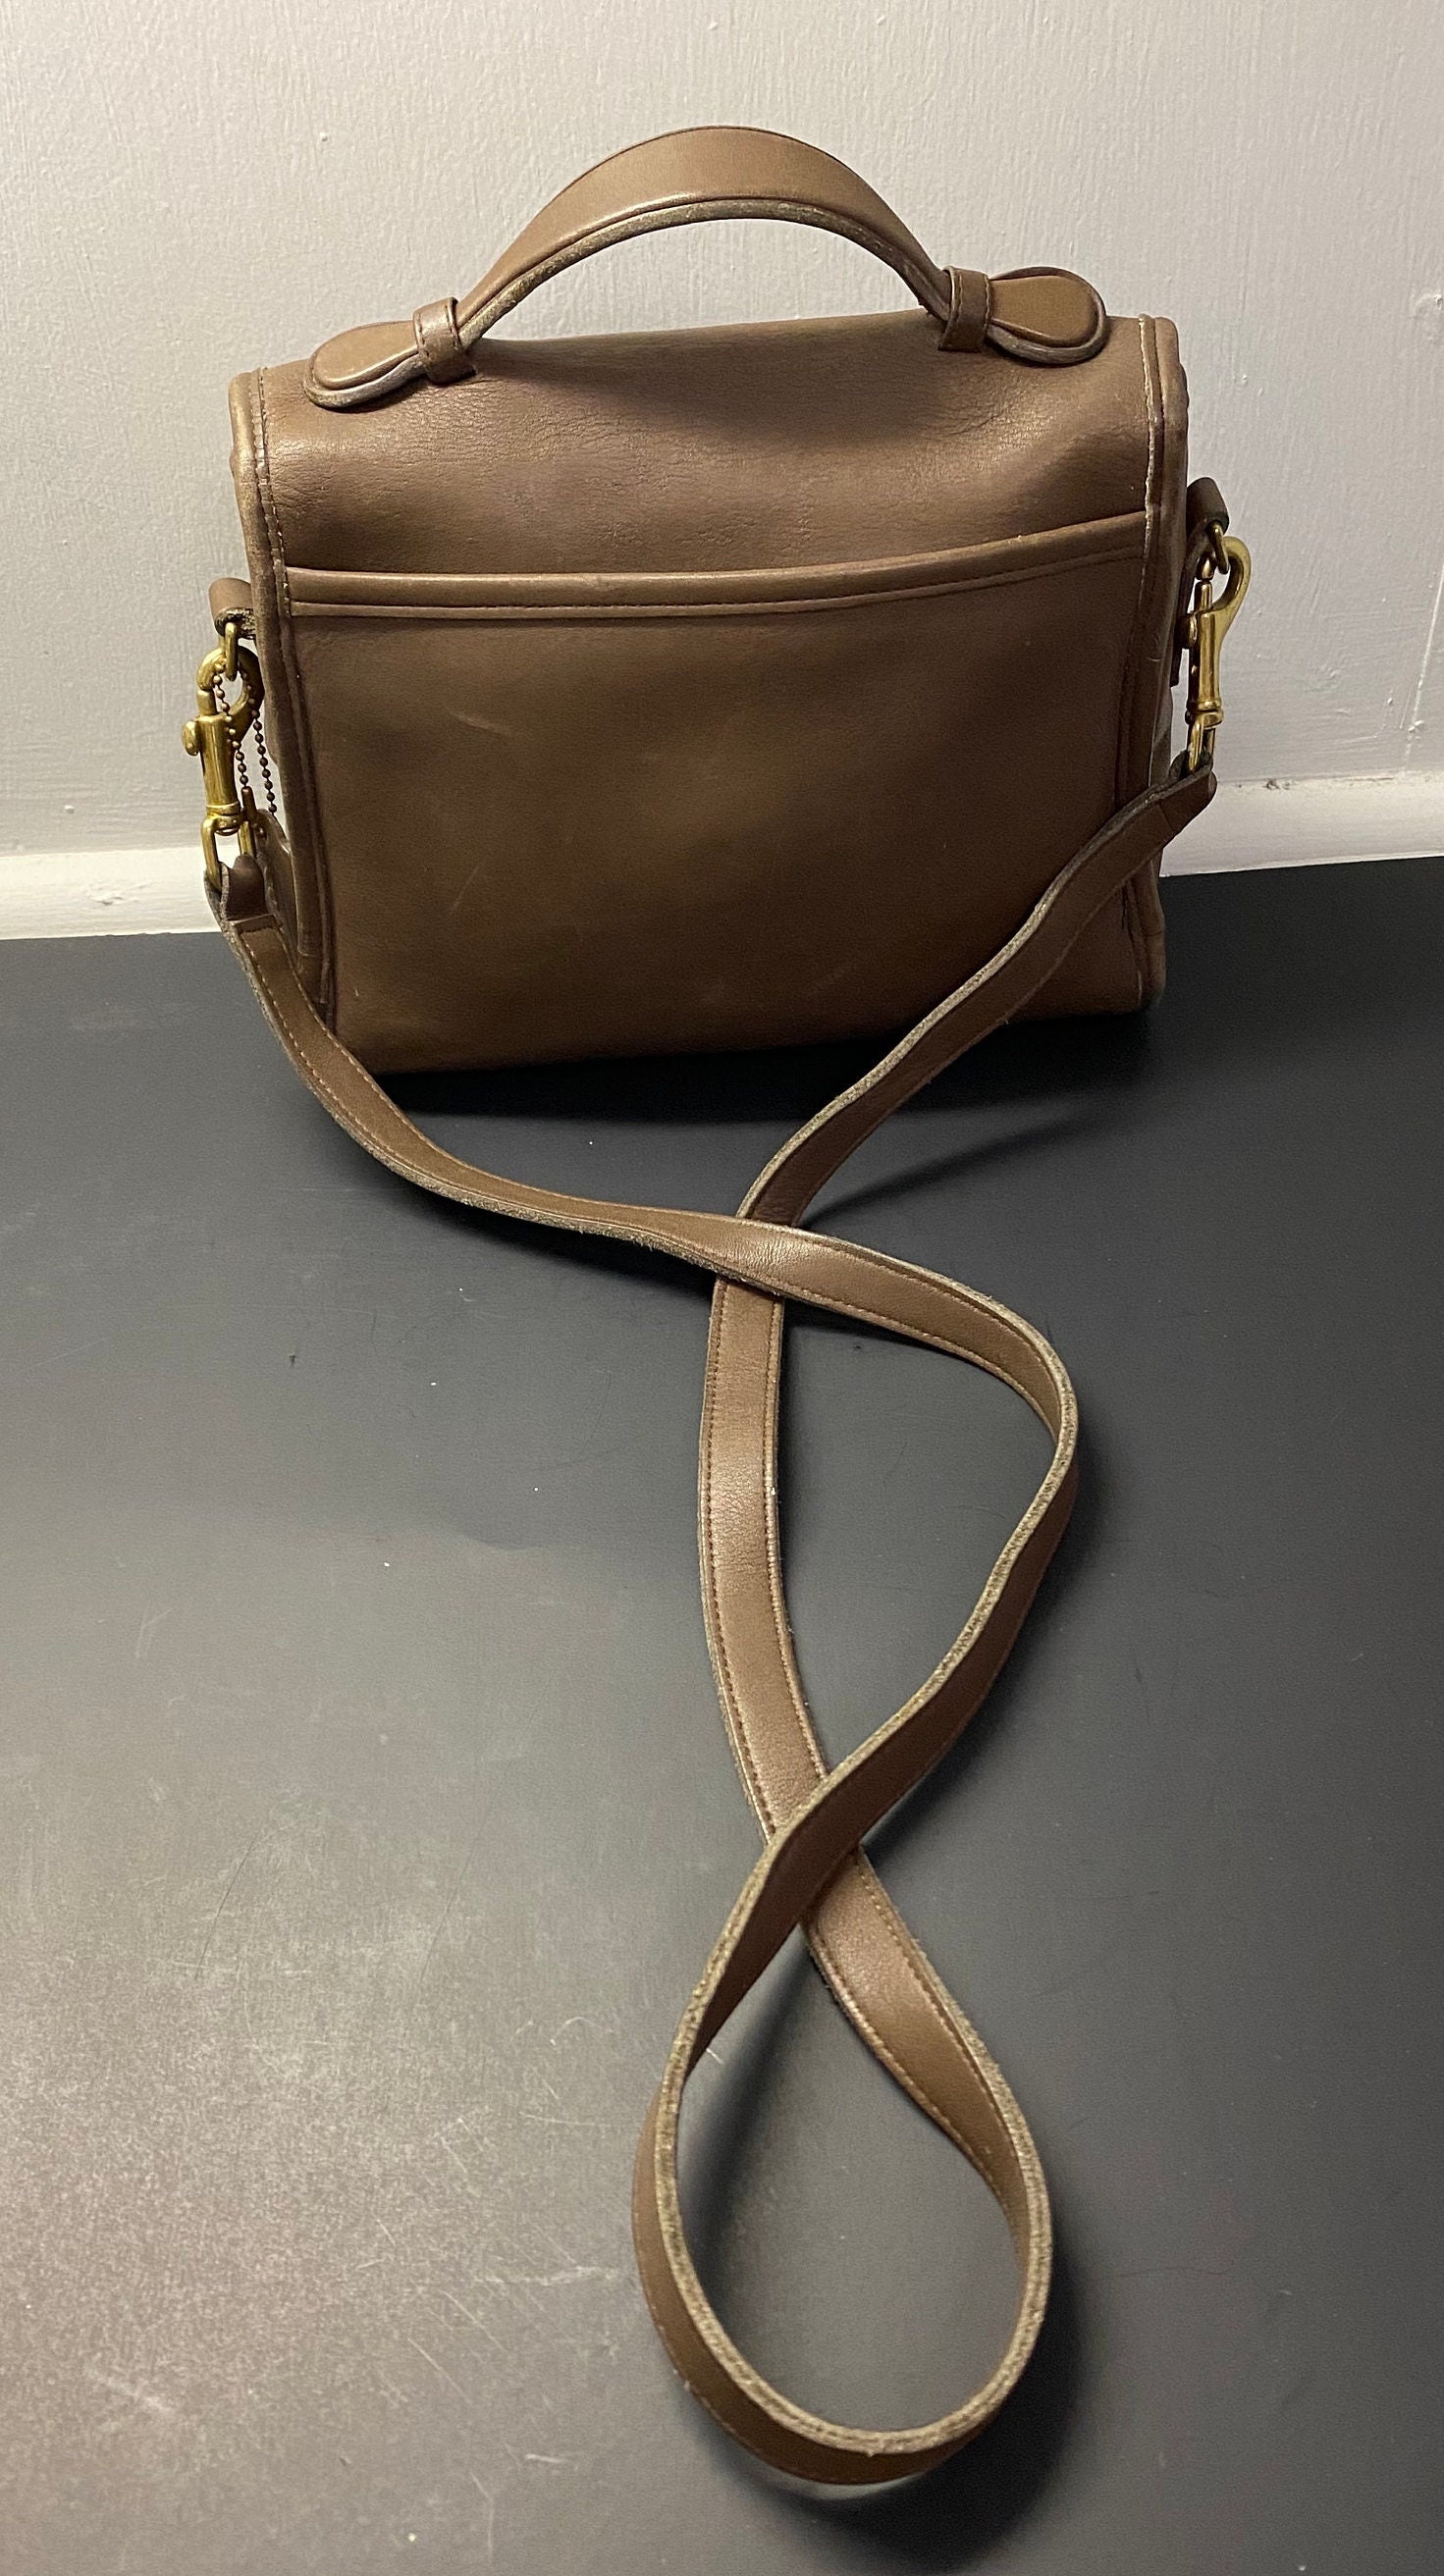 Vintage Coach Brown Tan Leather Court Bag Crossbody Style 9870 ...